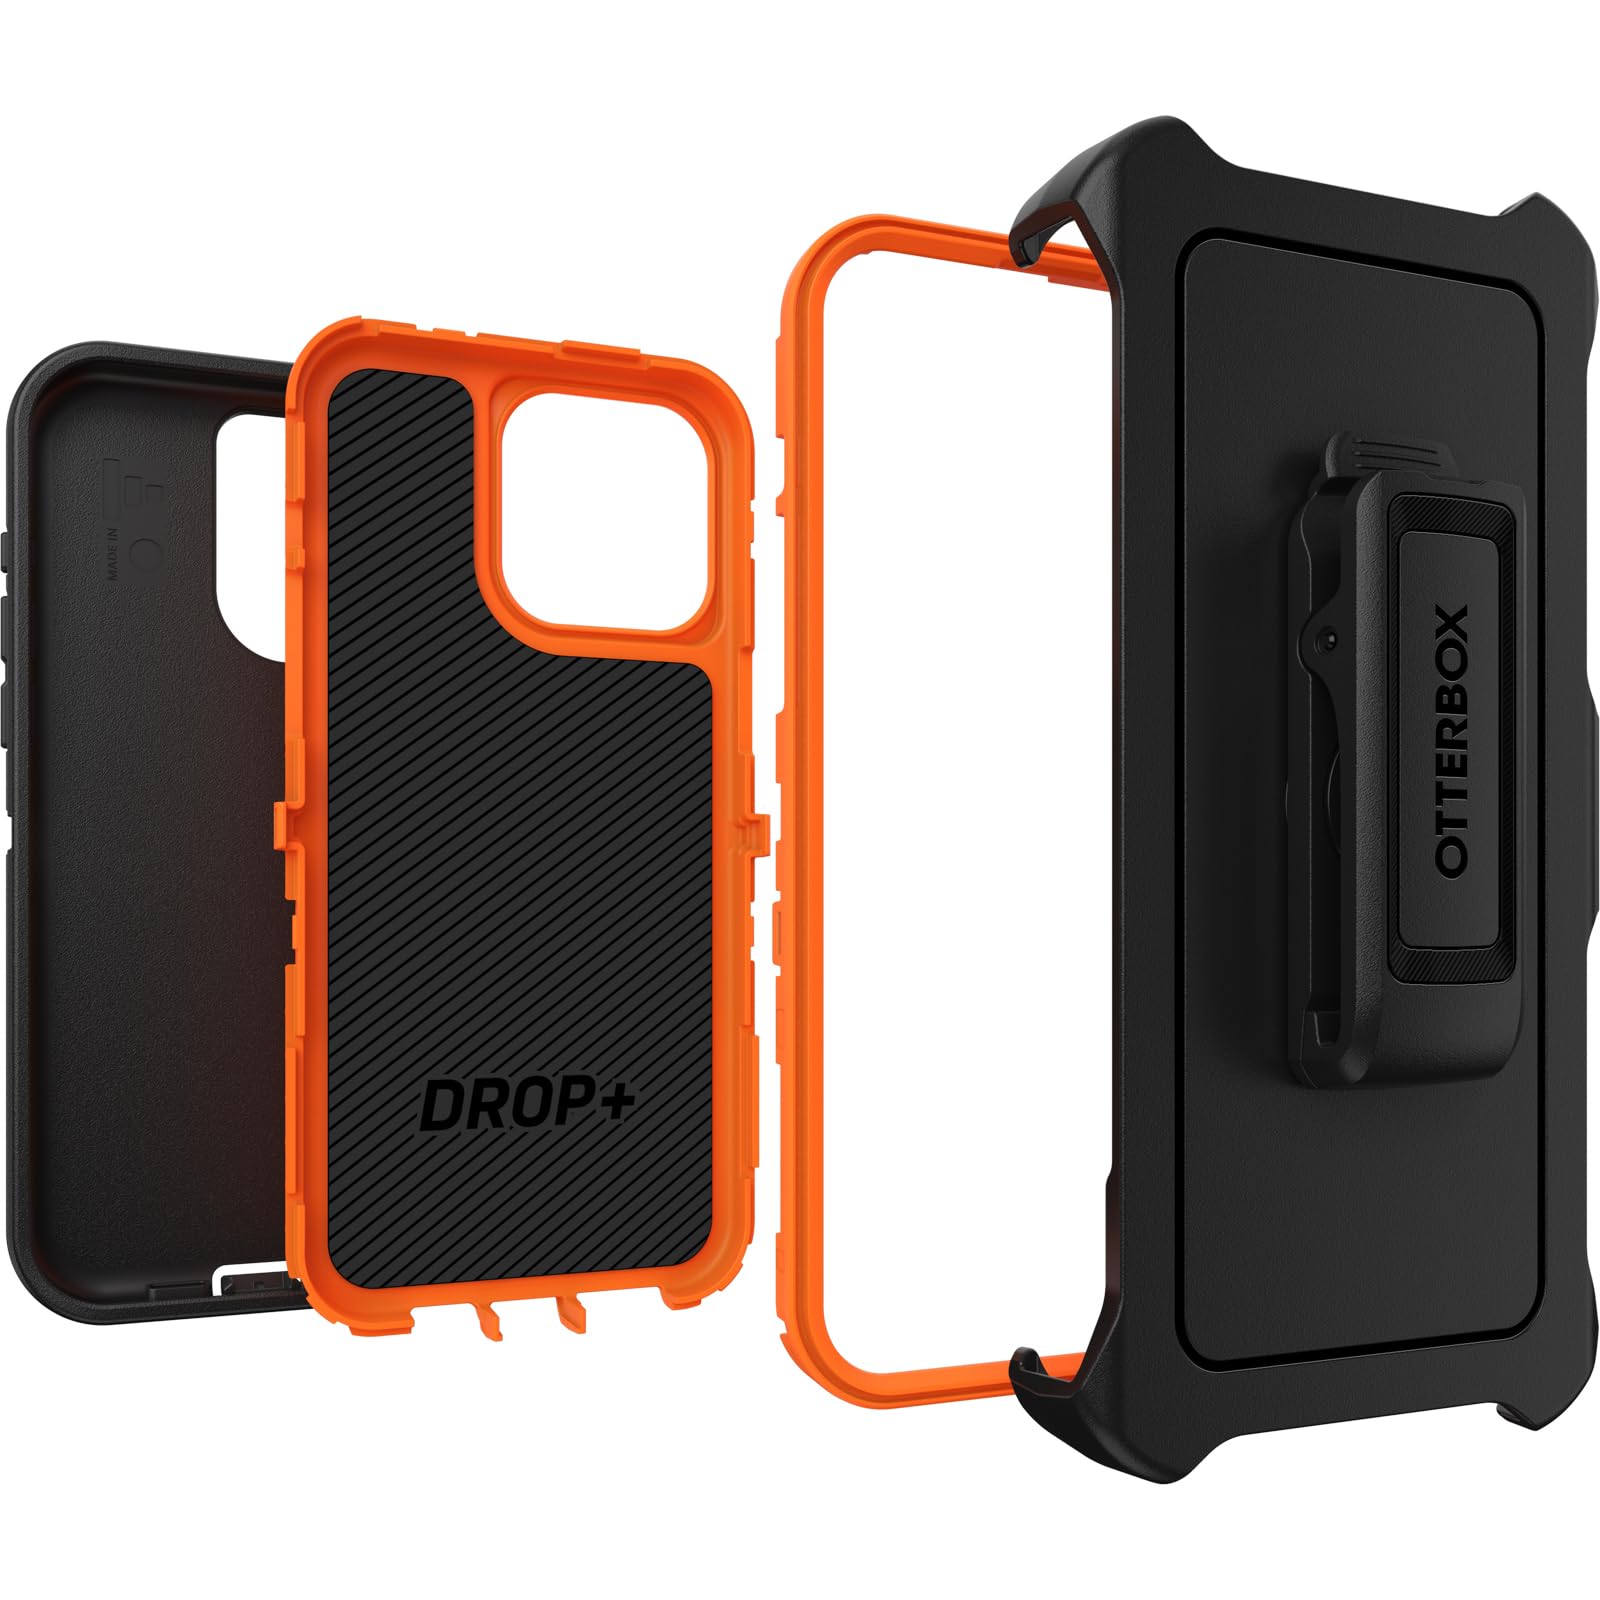 OtterBox iPhone 15 Pro MAX (Only) Defender Series Case - REALTREE EDGE (Blaze Orange/Black/RT Edge) , rugged & durable, with port protection, includes holster clip kickstand